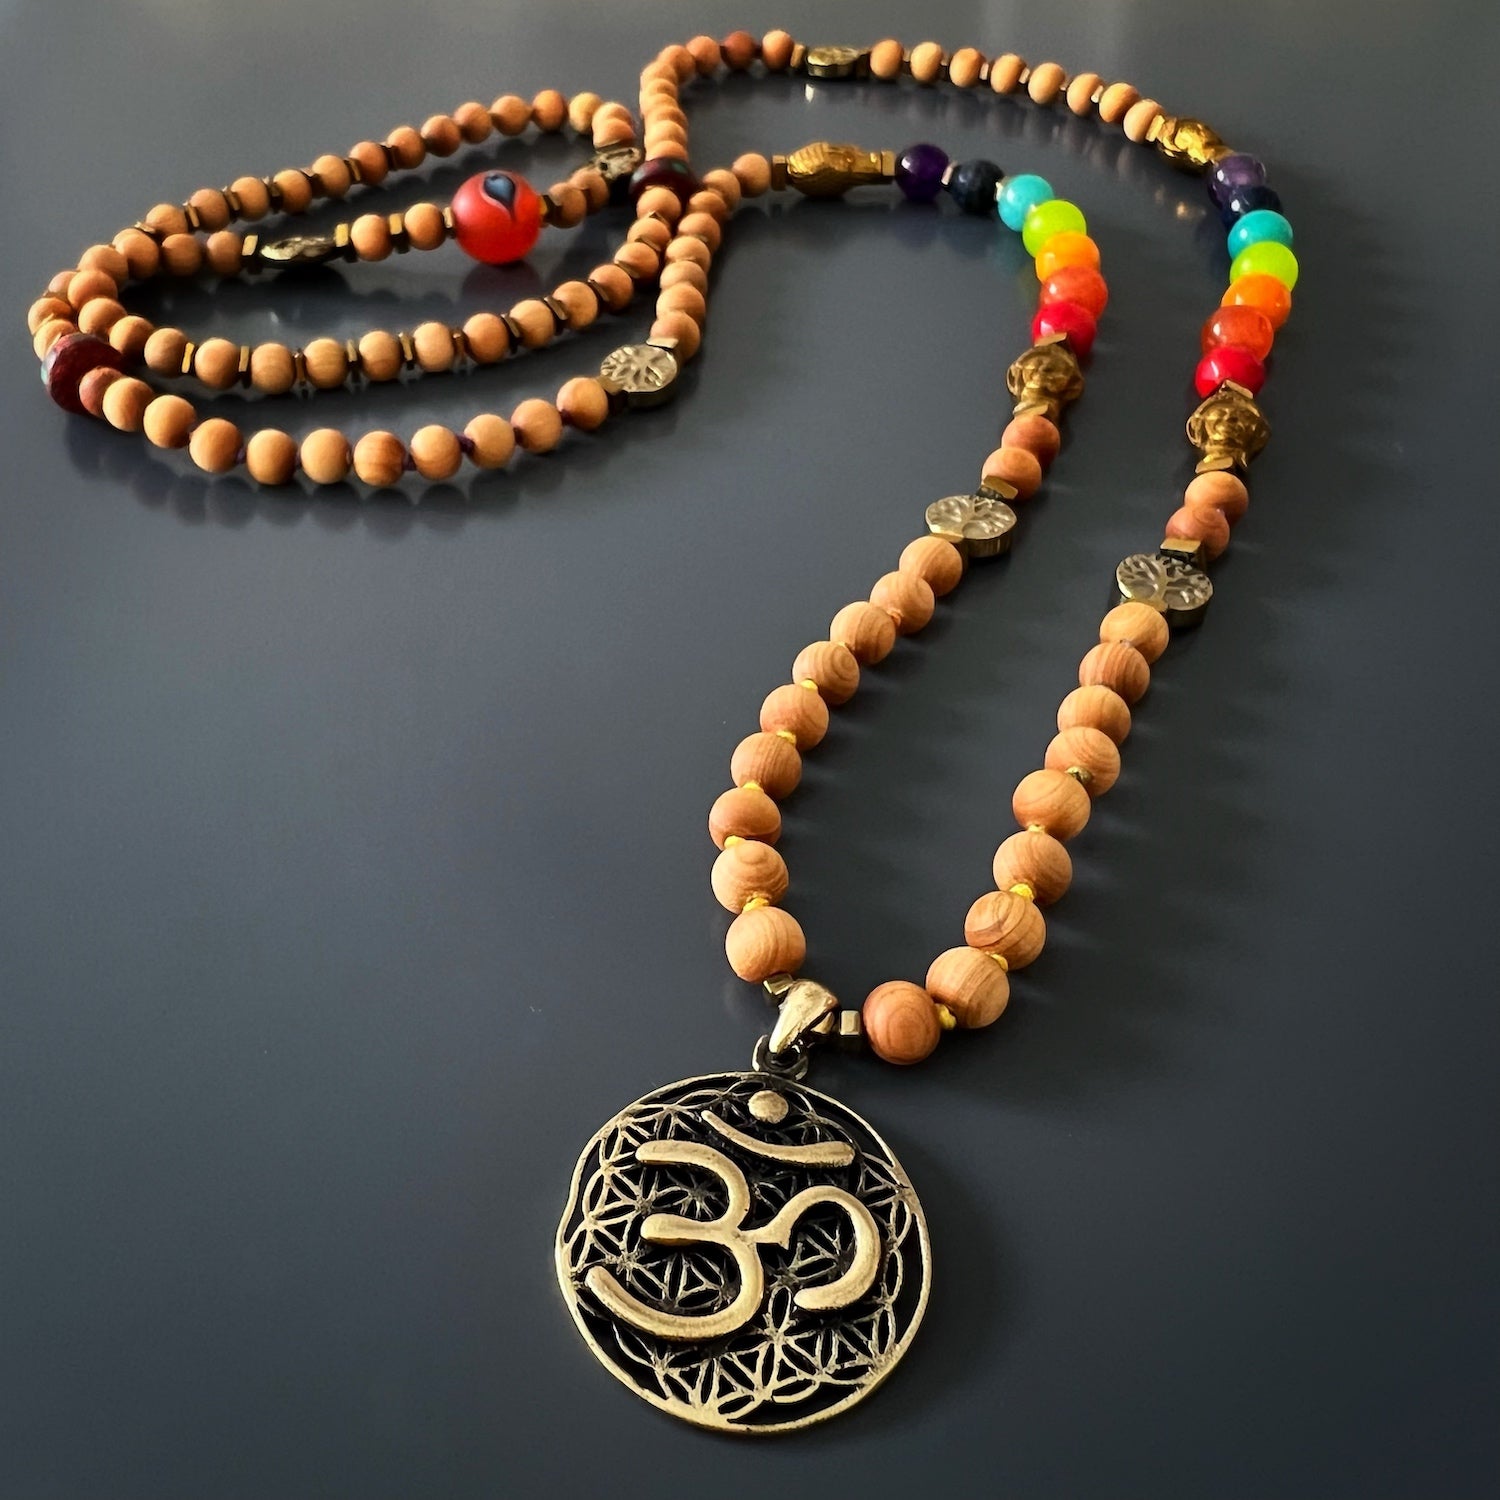 Find balance and harmony with the Chakra Yoga Mala Necklace, a meaningful and unique piece of jewelry.